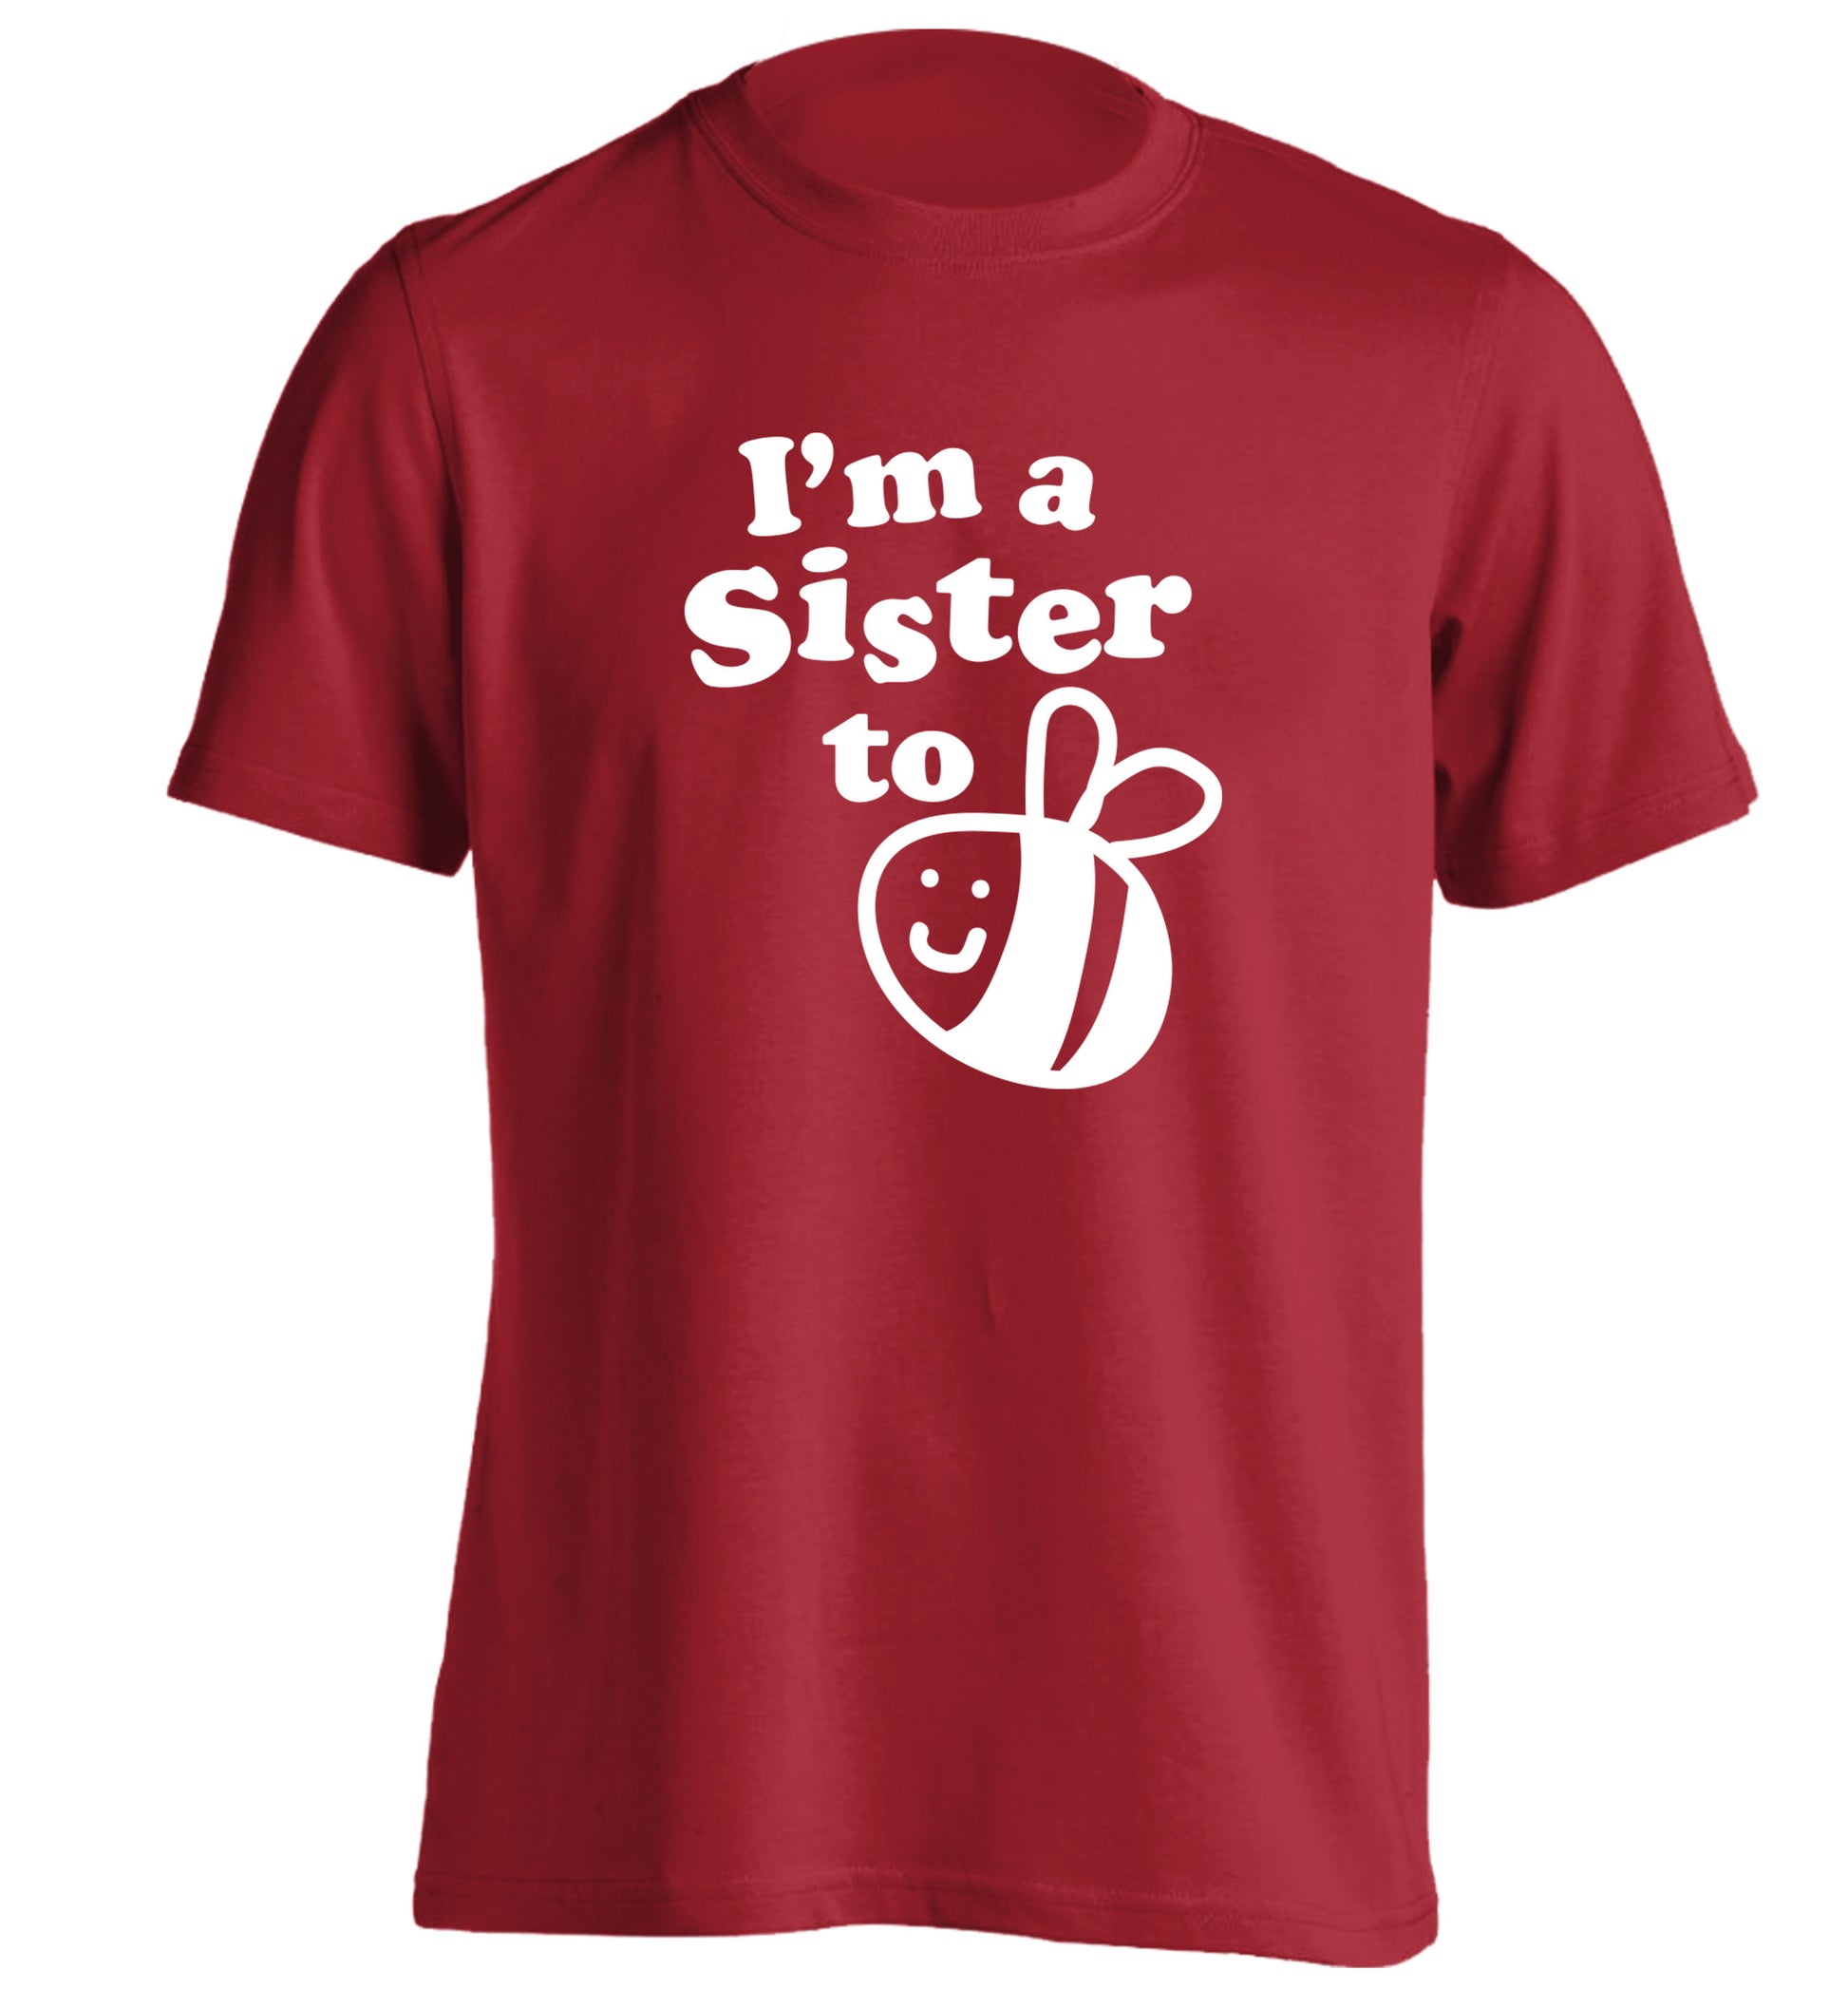 I'm a sister to be adults unisex red Tshirt 2XL